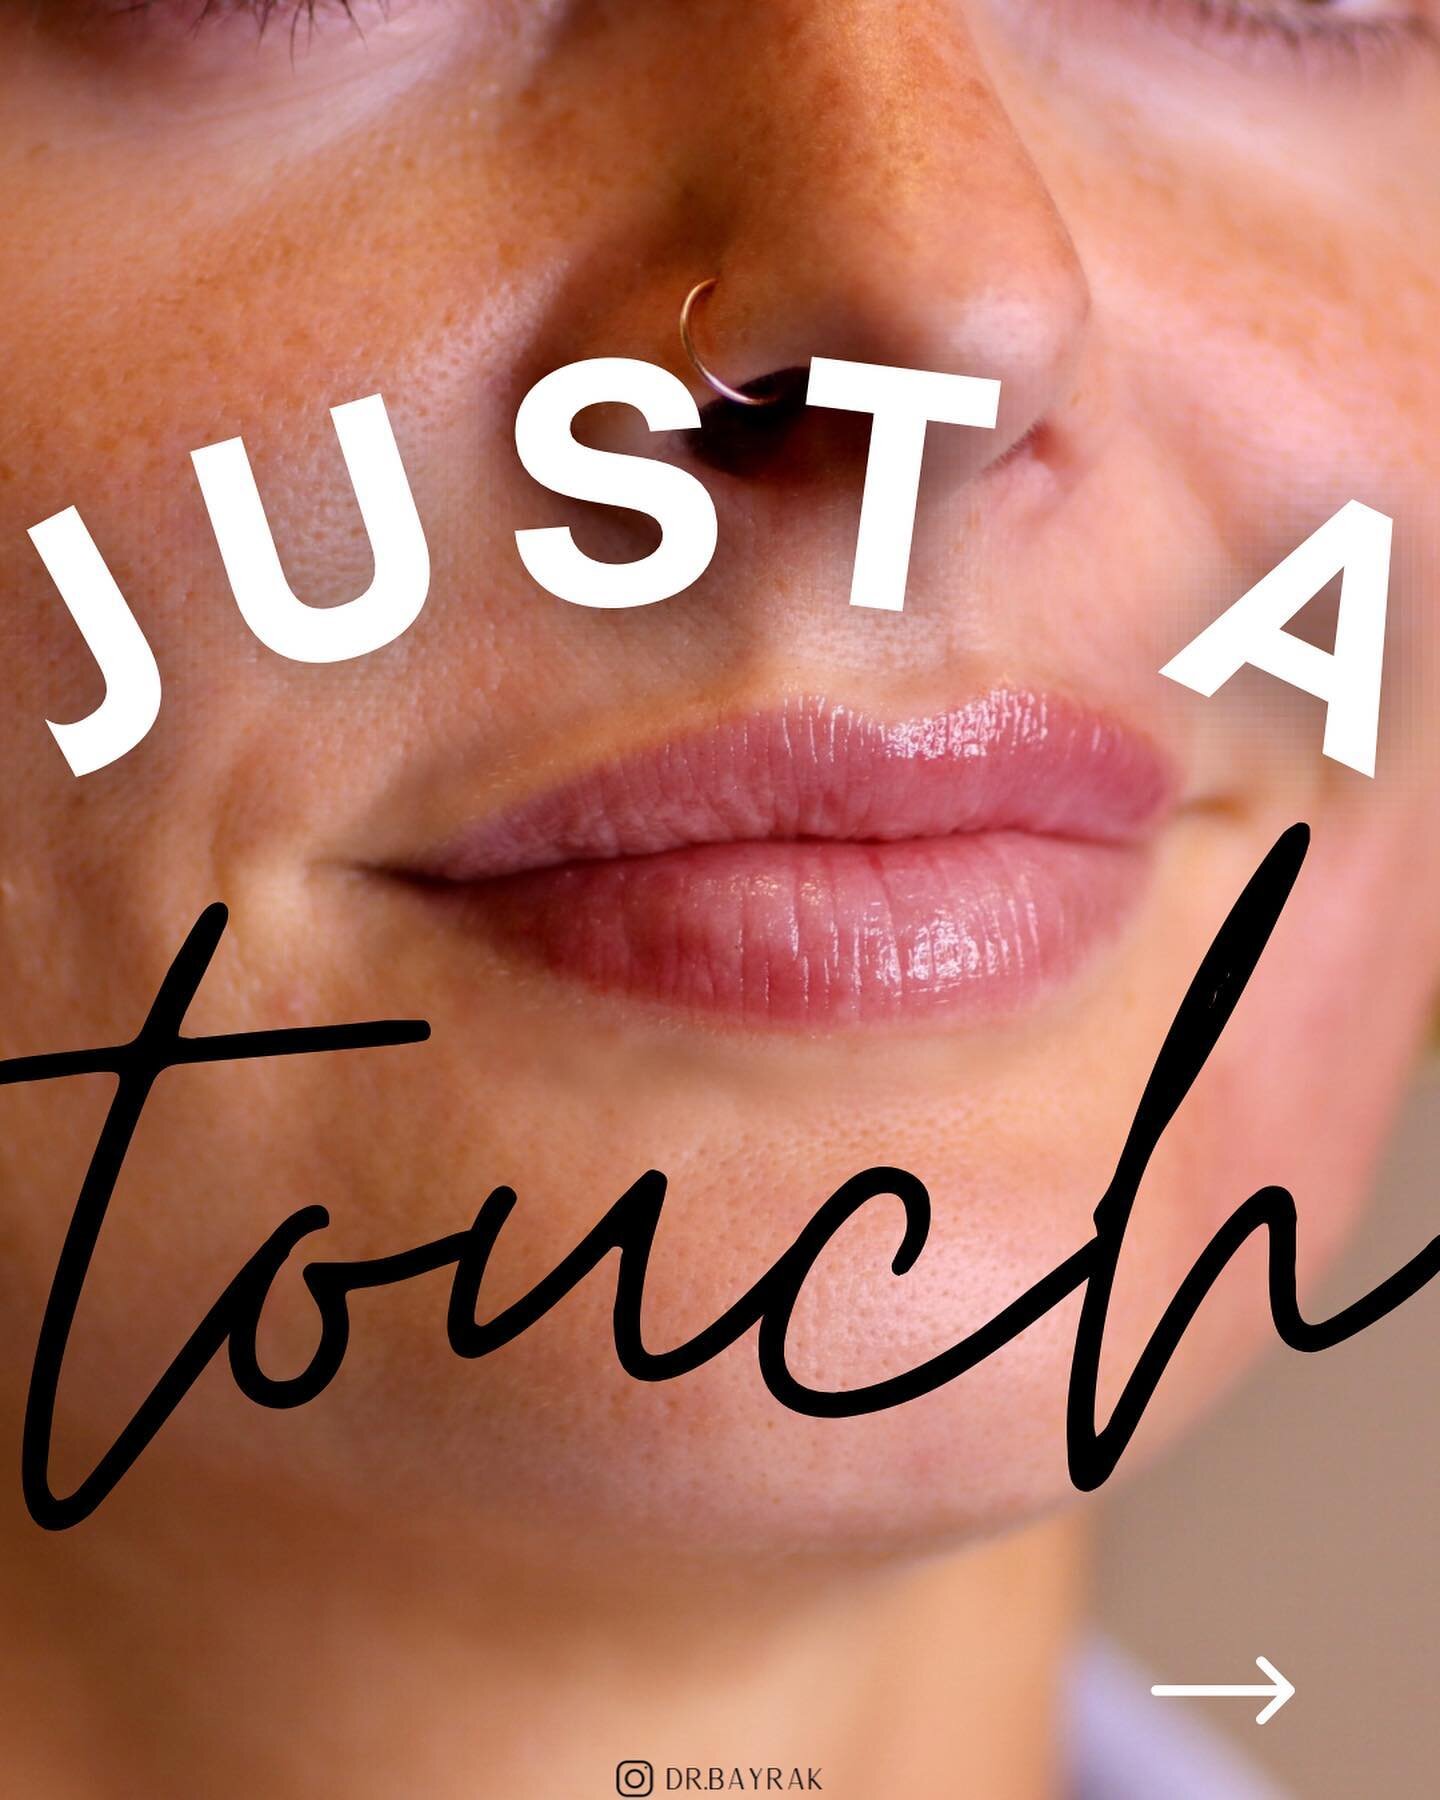 Patients often use the phrase &ldquo;just a touch&rdquo; 🤏🏼 to describe the amount of lip augmentation they want, but that can mean something very different to different people. In this case, the goal was to recreate the hydration and plumpness of 